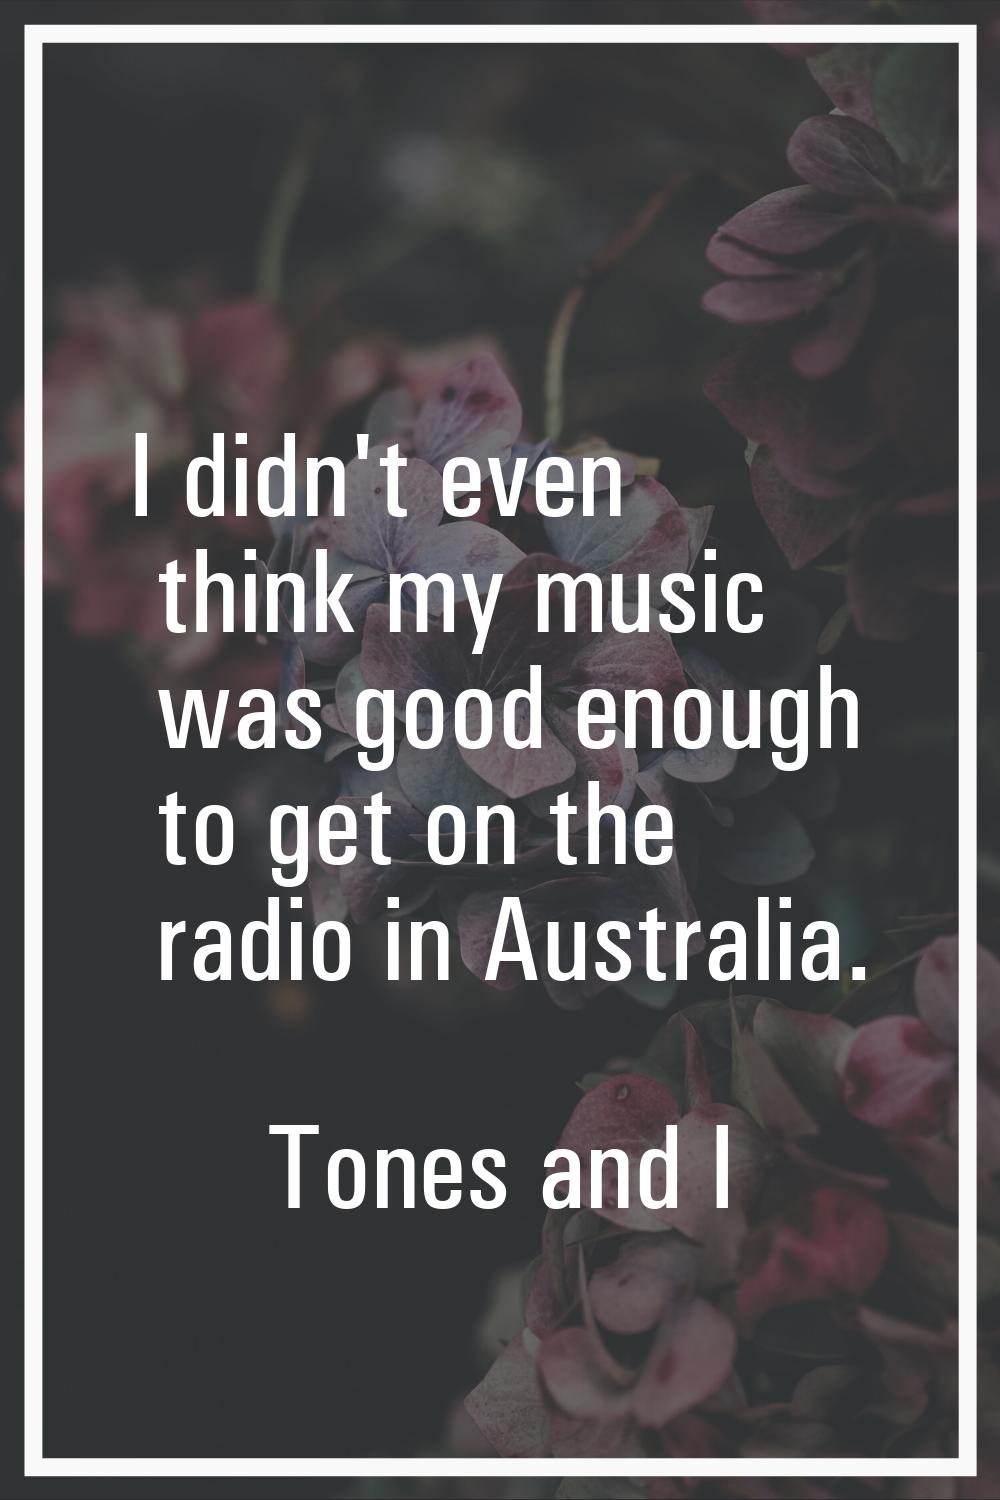 I didn't even think my music was good enough to get on the radio in Australia.